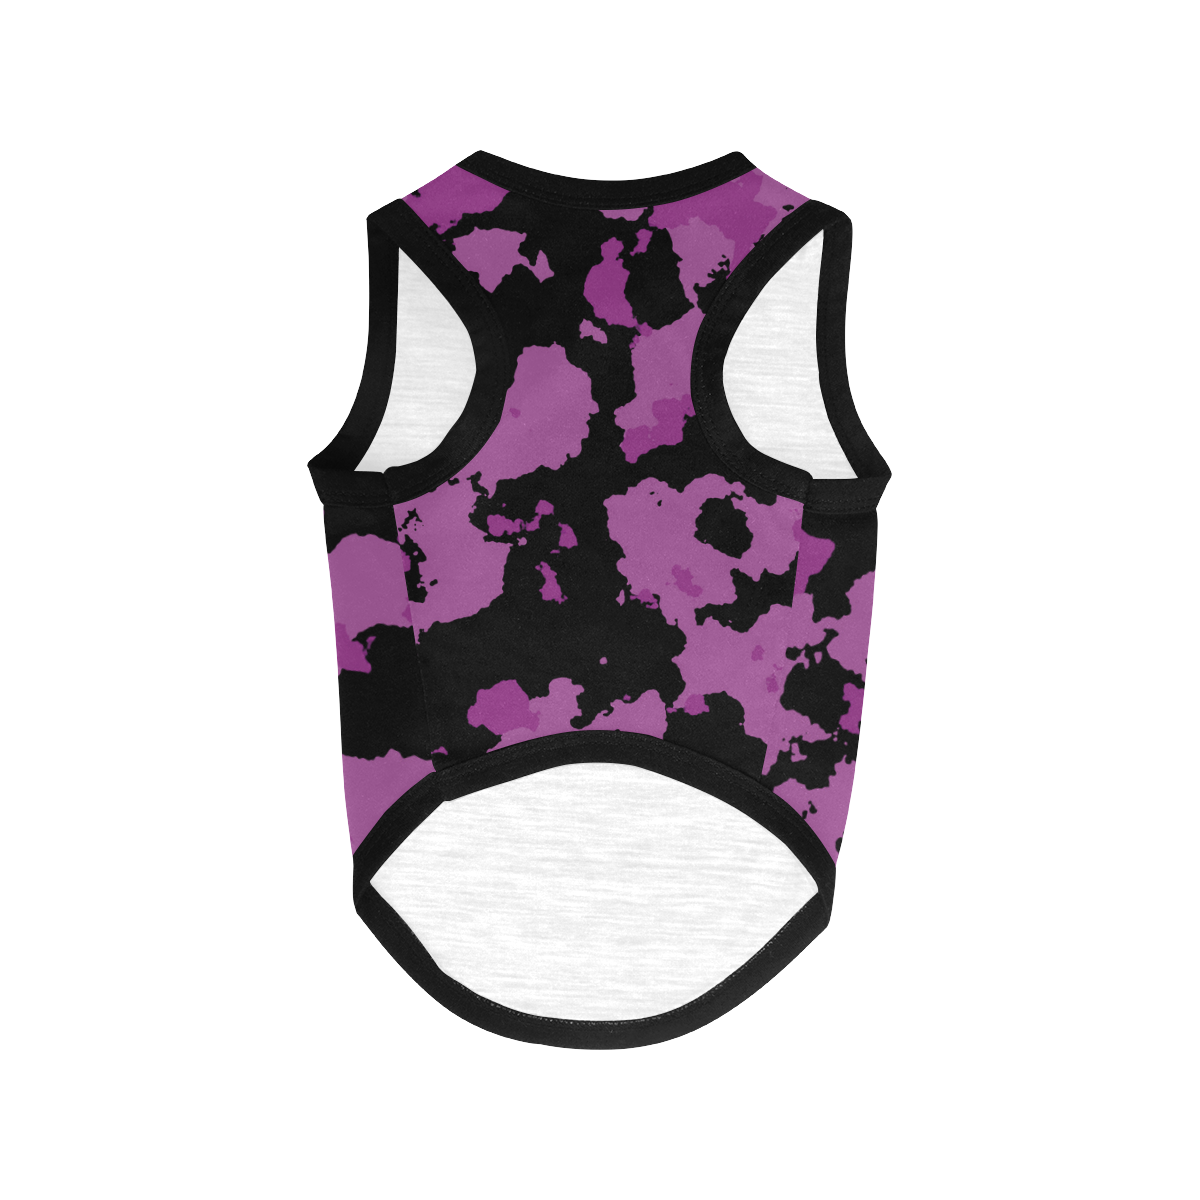 purple camouflage pattern All Over Print Pet Tank Top